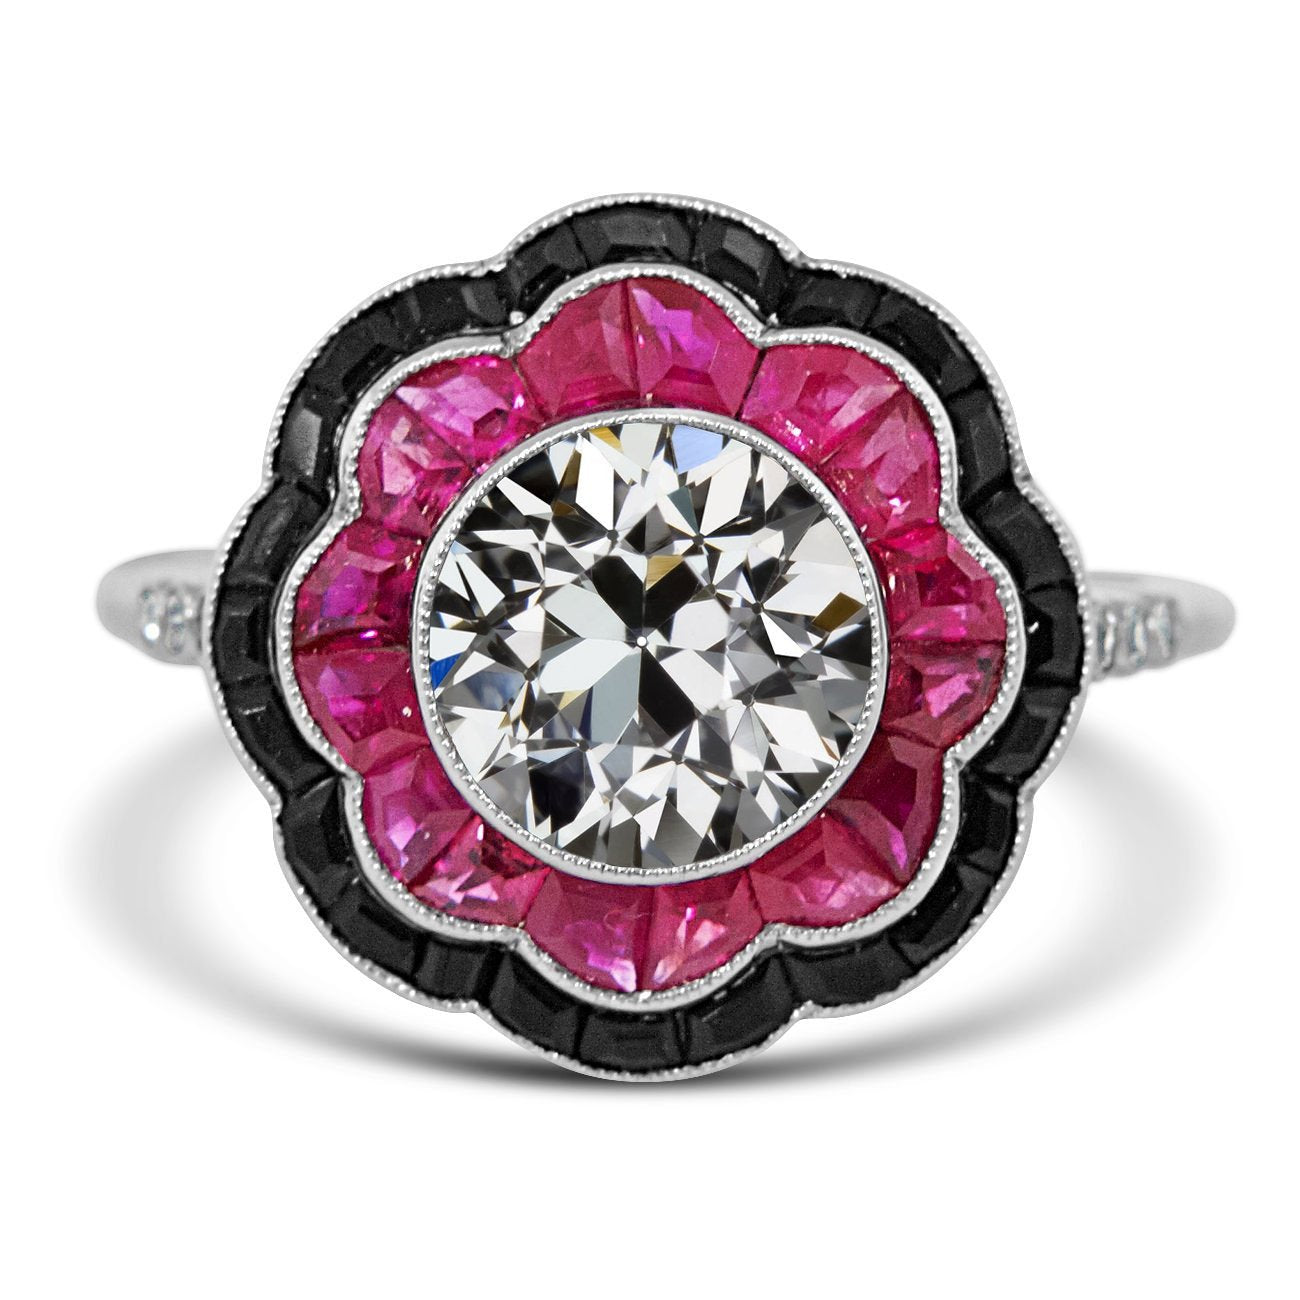 Halo Art Deco Jewelry New Old Cut Ring Black Onyx & Pink Sapphire Flower Style